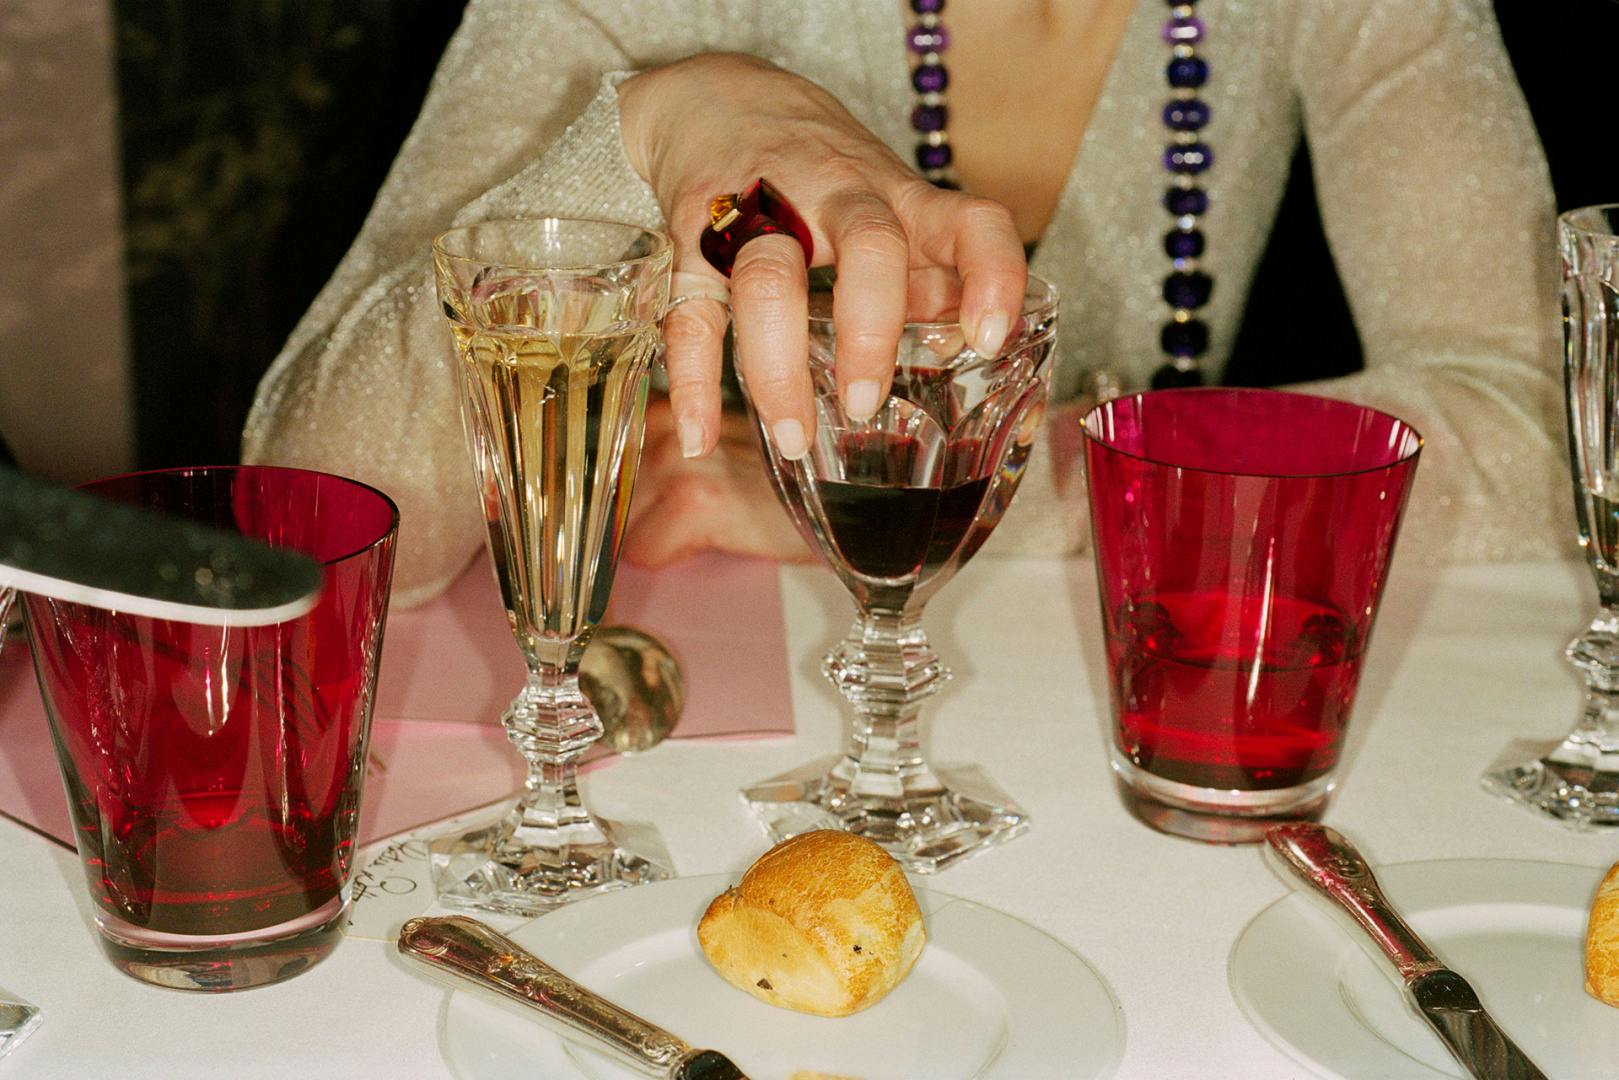 Photograph of a decorated dining table and a person holding a wine glass by Magnum photographer Martin Parr